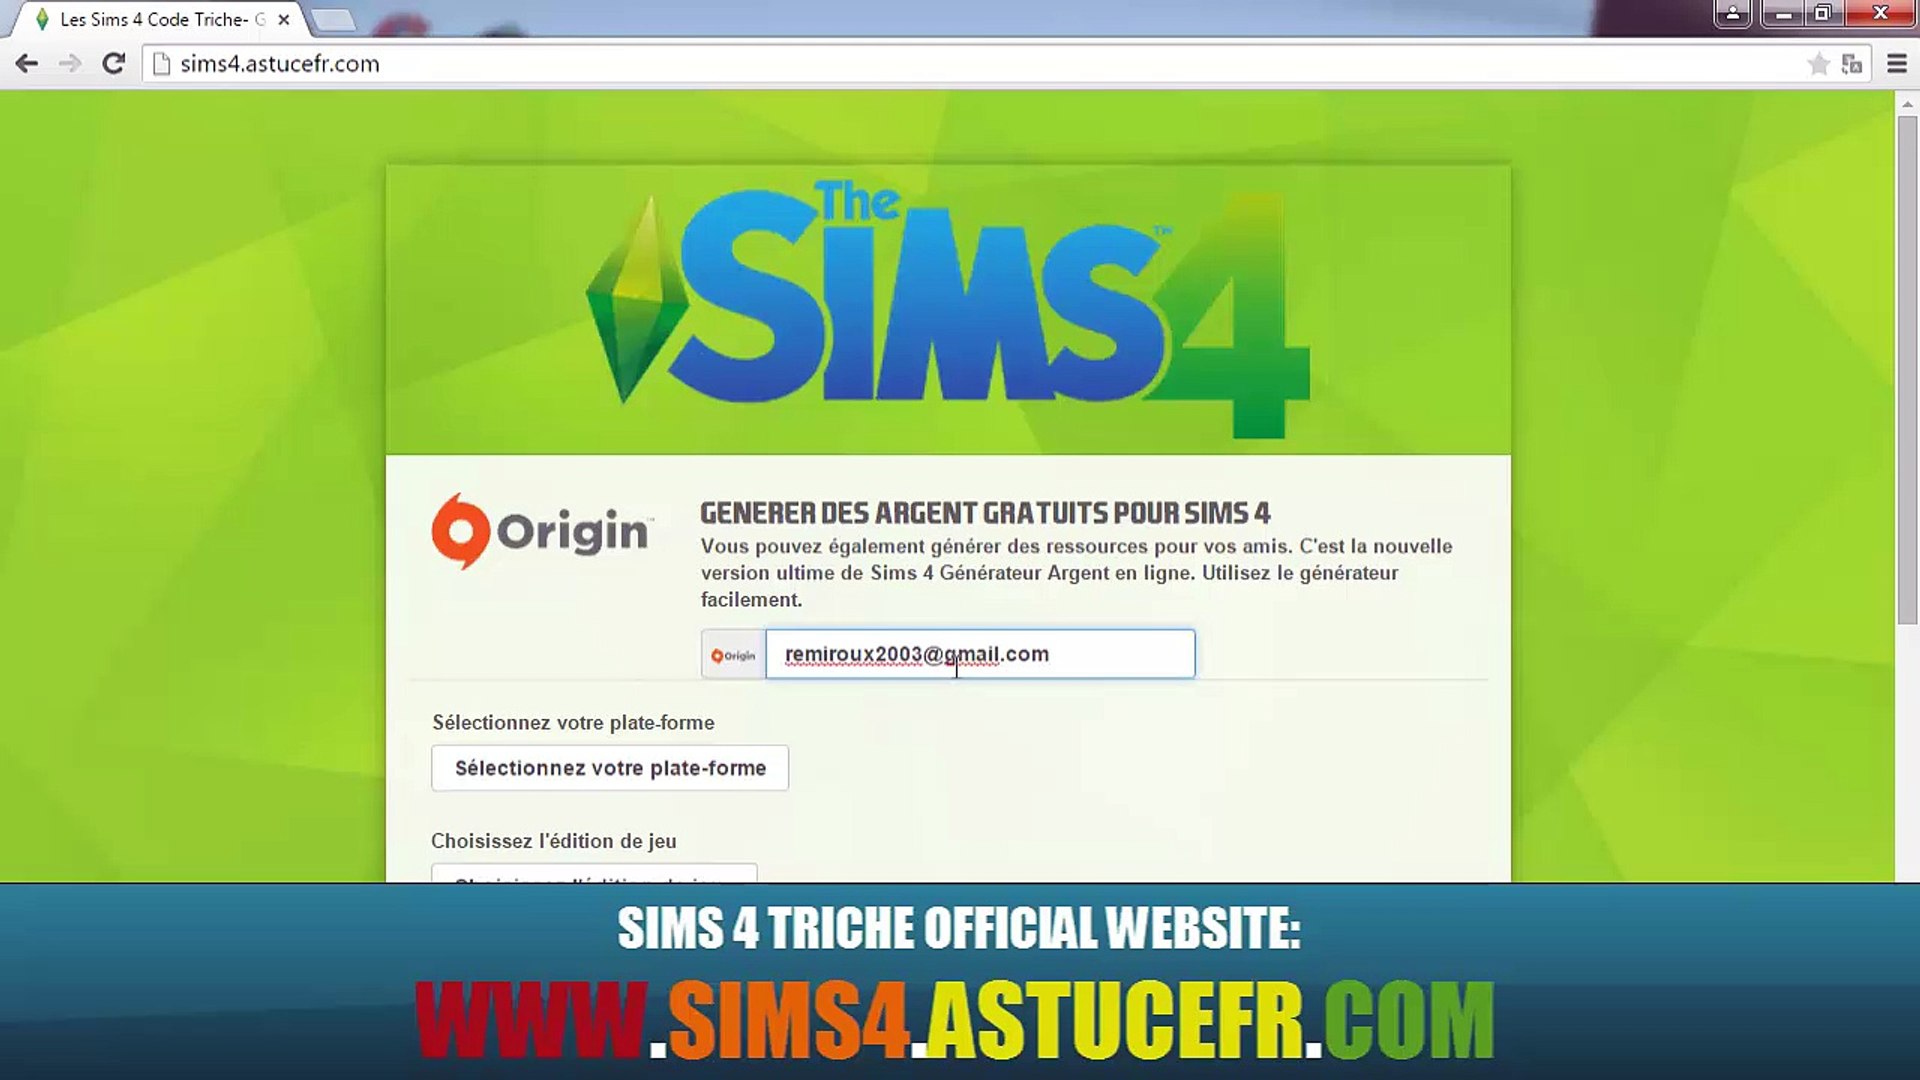 Code Triche Sims 4 - video Dailymotion